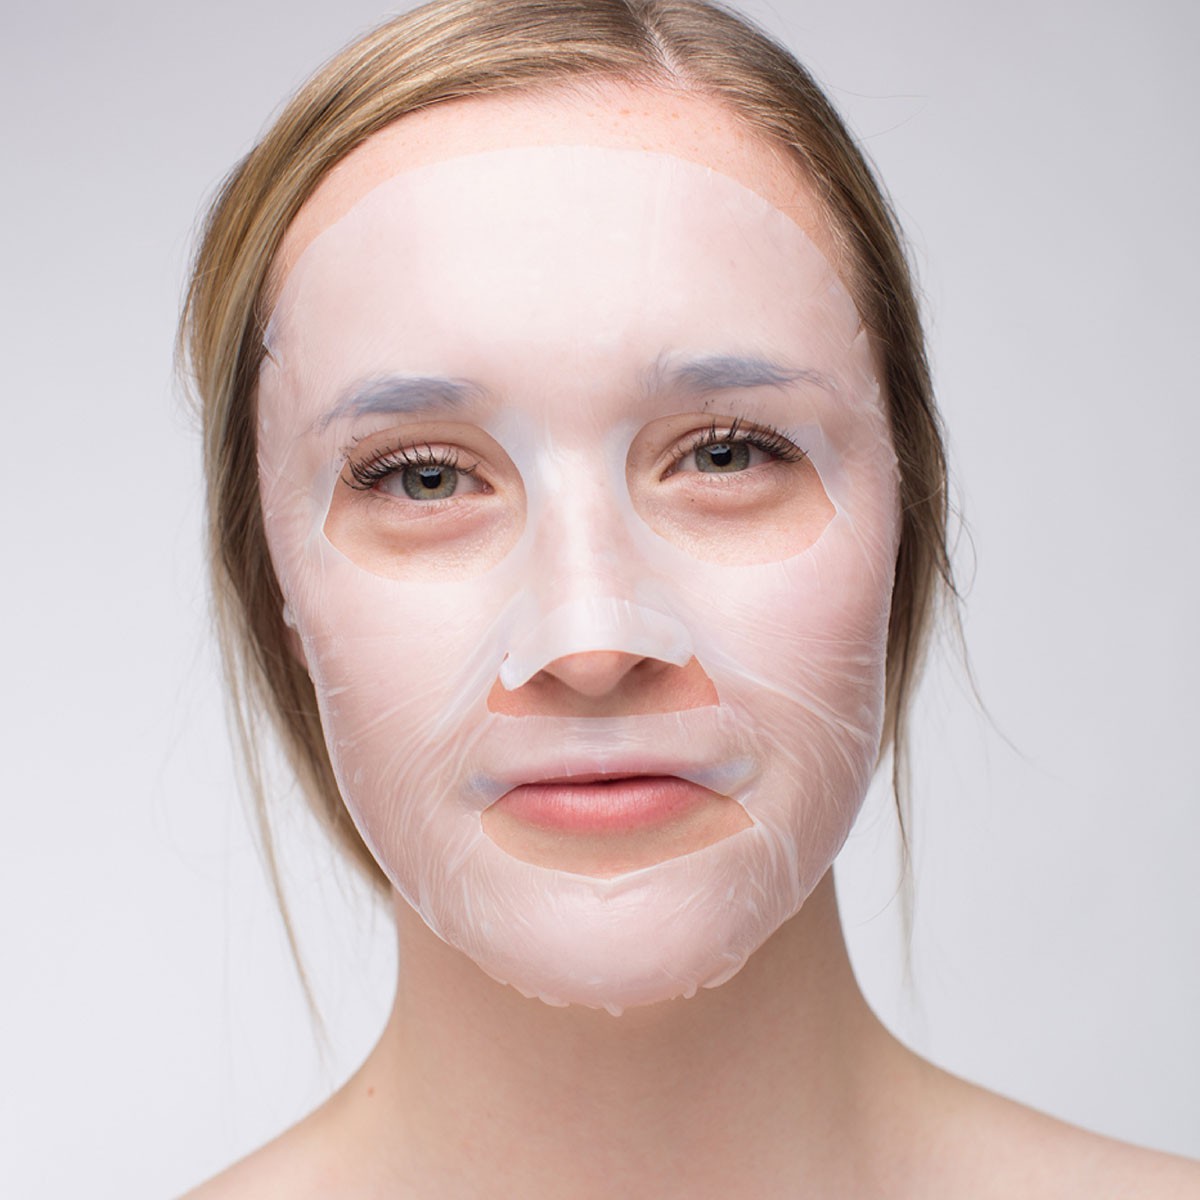 Mask applied to woman's face